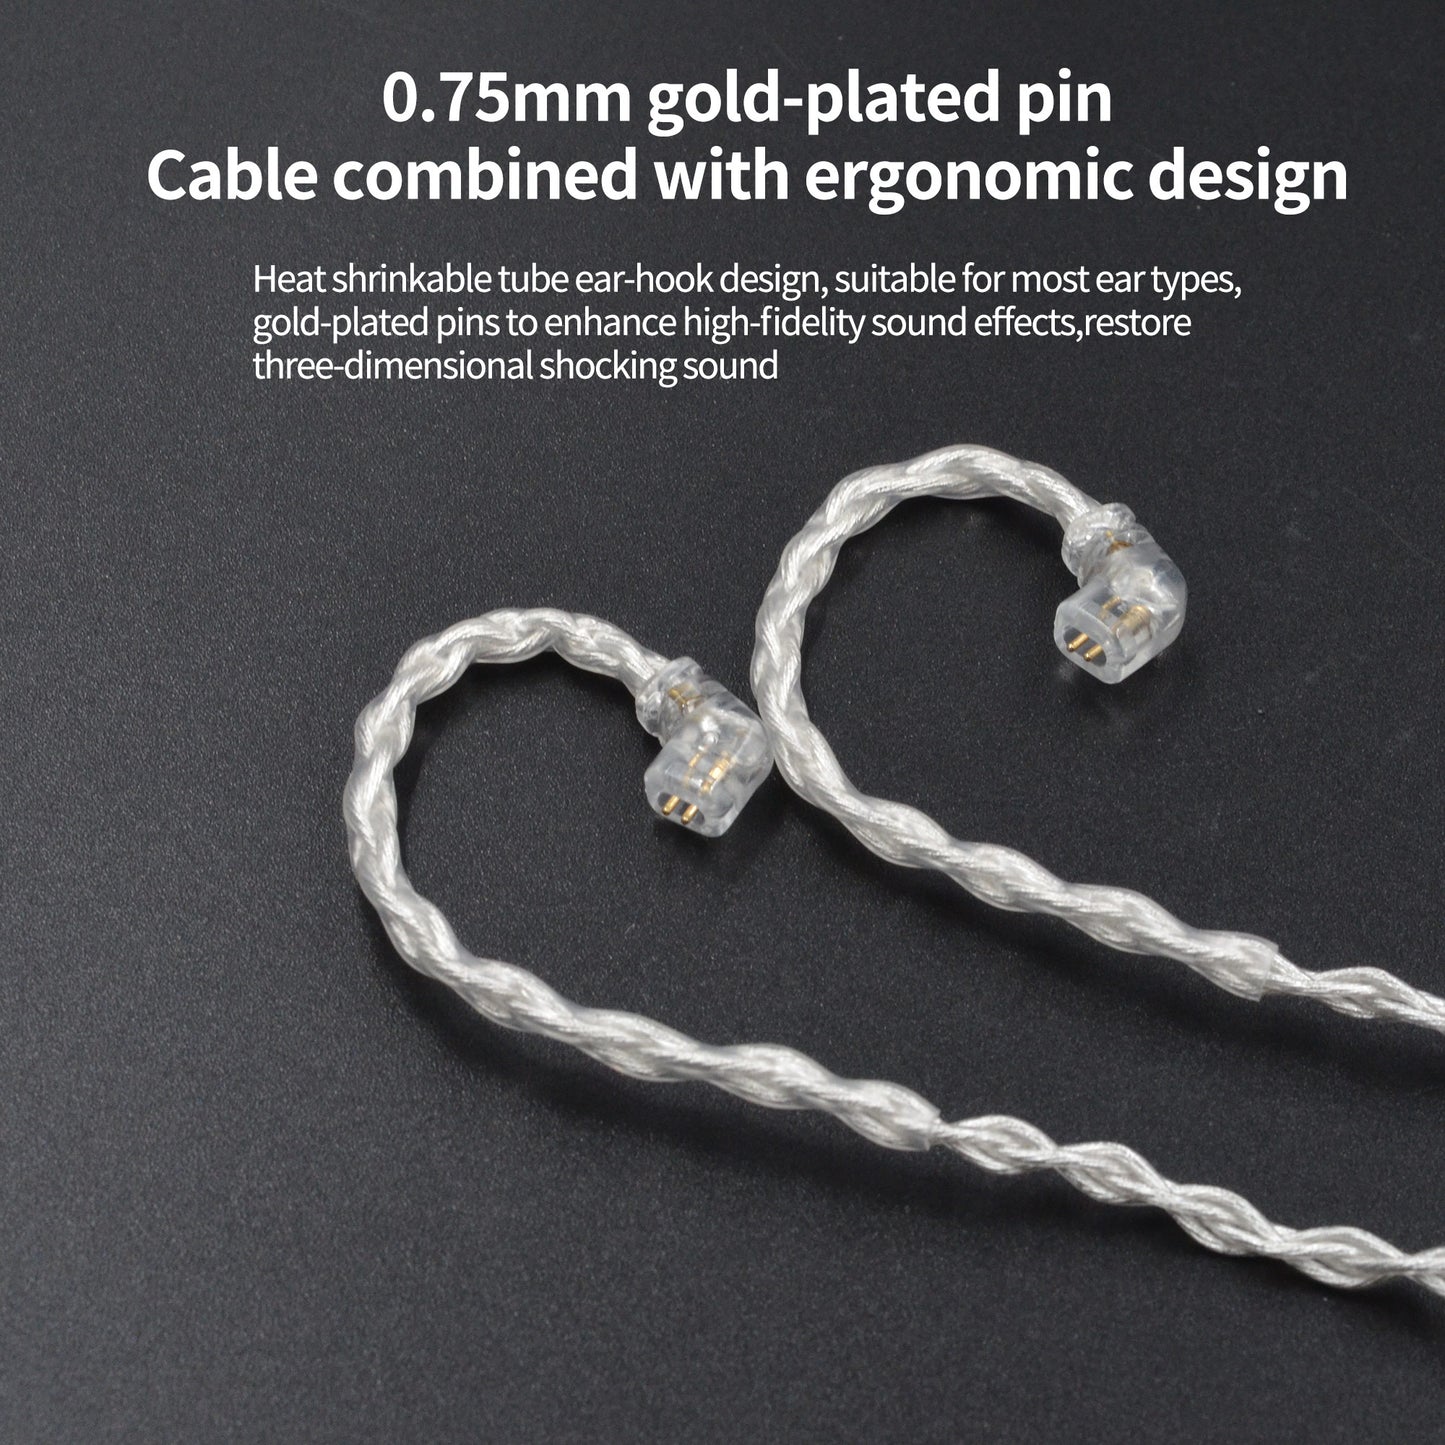 1064 Core Silver-Plated Upgrade Earphone Cable